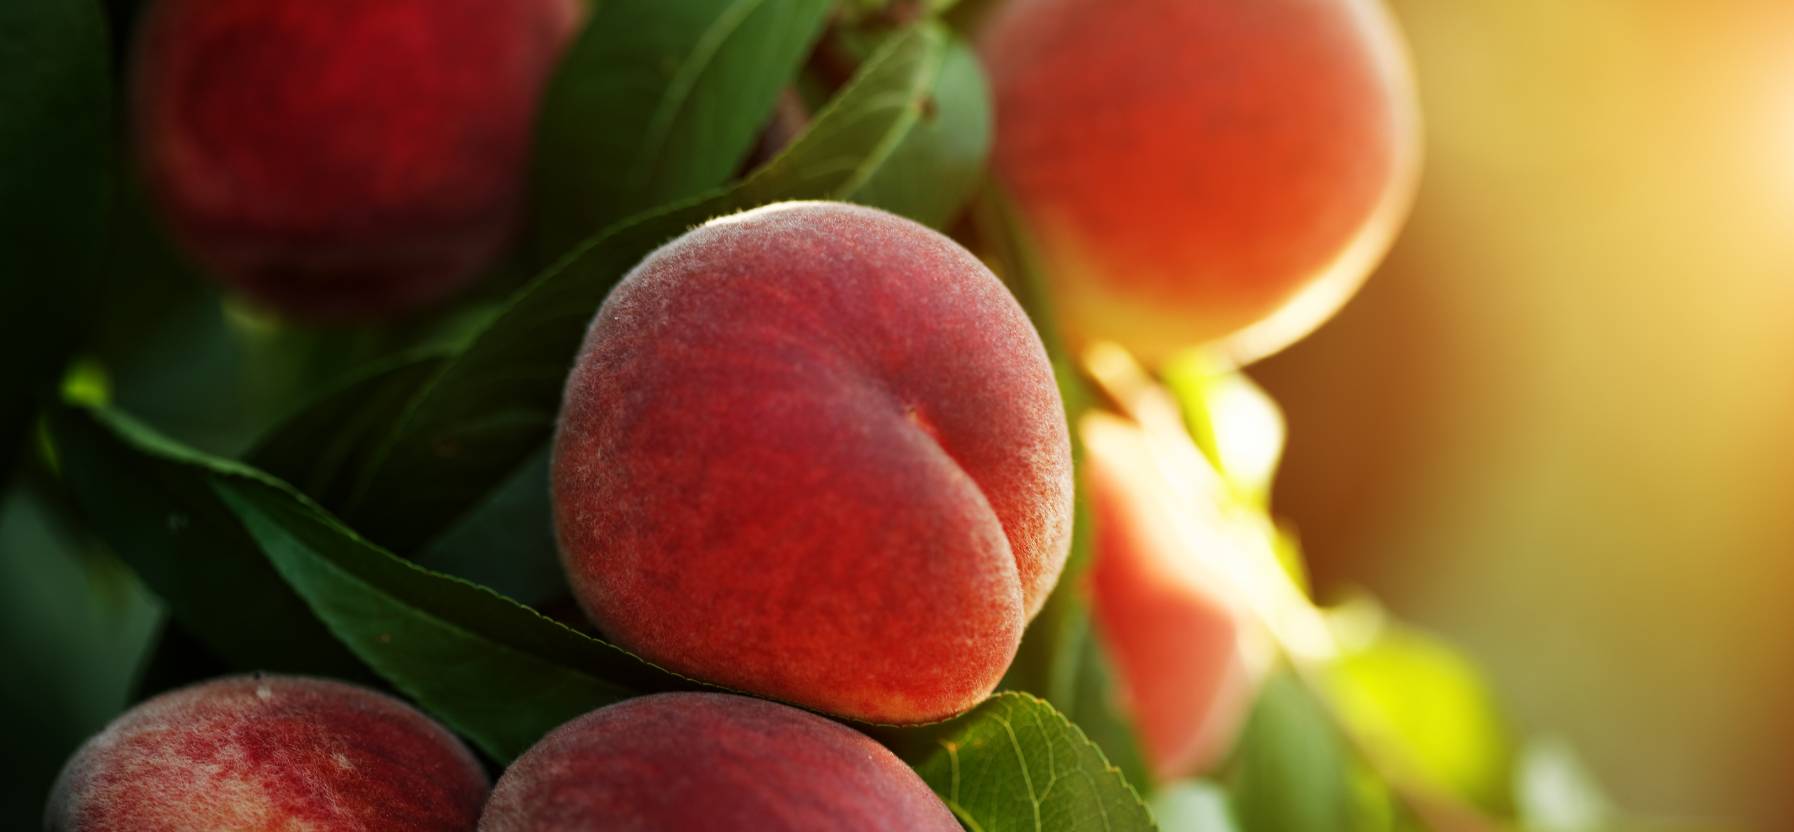 Gerawan Farming and Wawona Packing Merge to Create the Leading Stone Fruit Producer